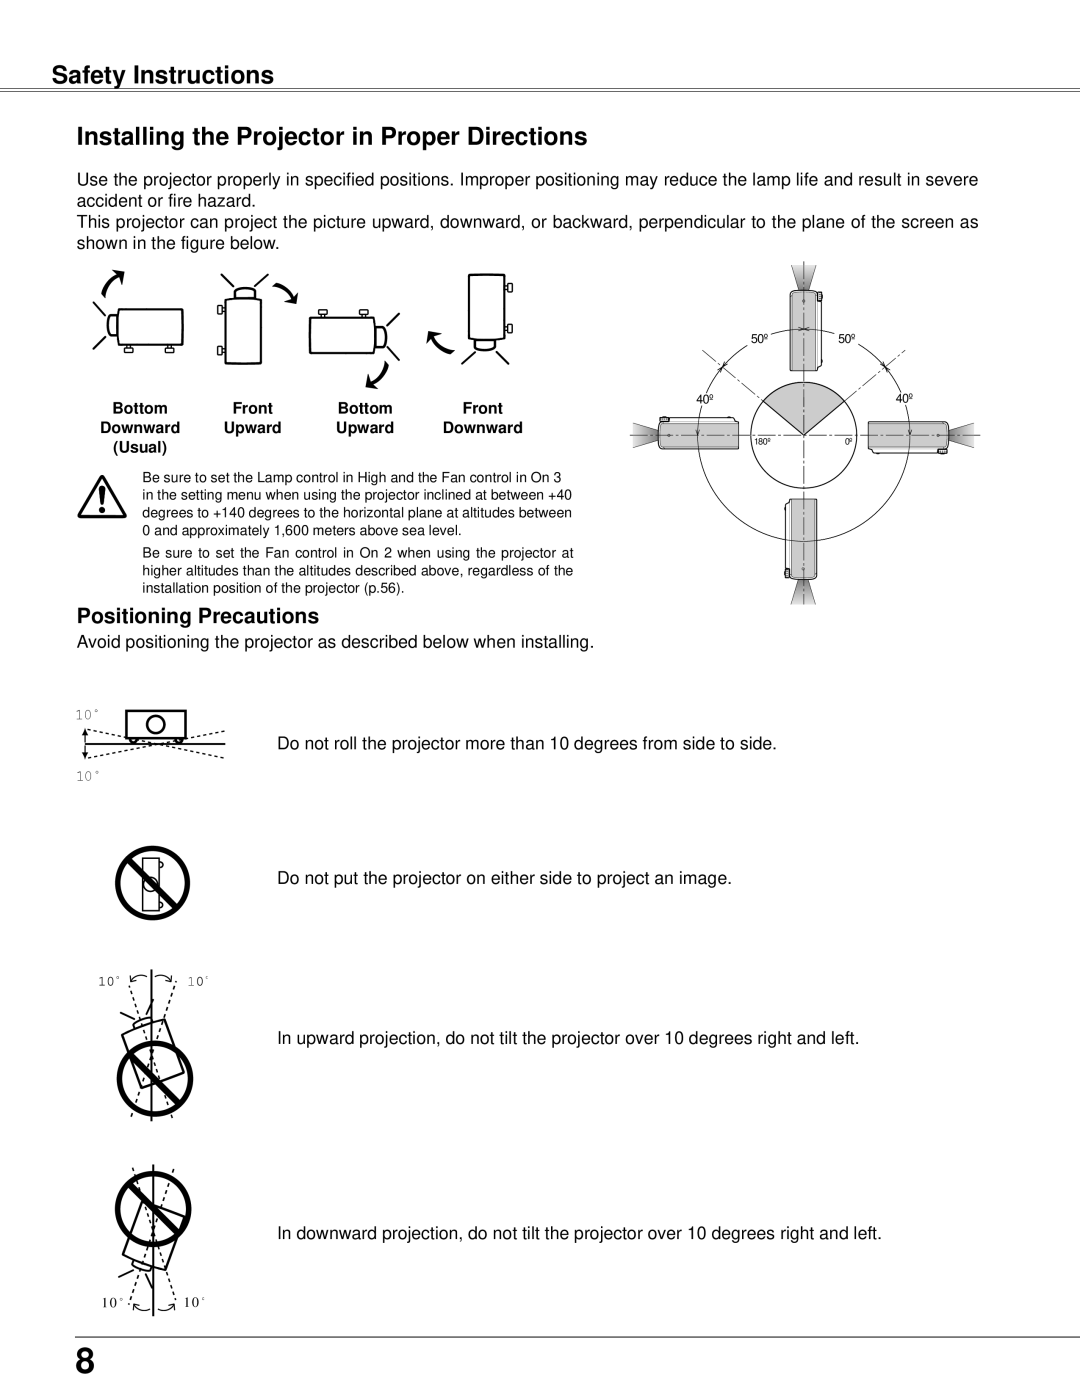 Eiki LC-XB42N owner manual Safety Instructions Installing the Projector in Proper Directions, Positioning Precautions 